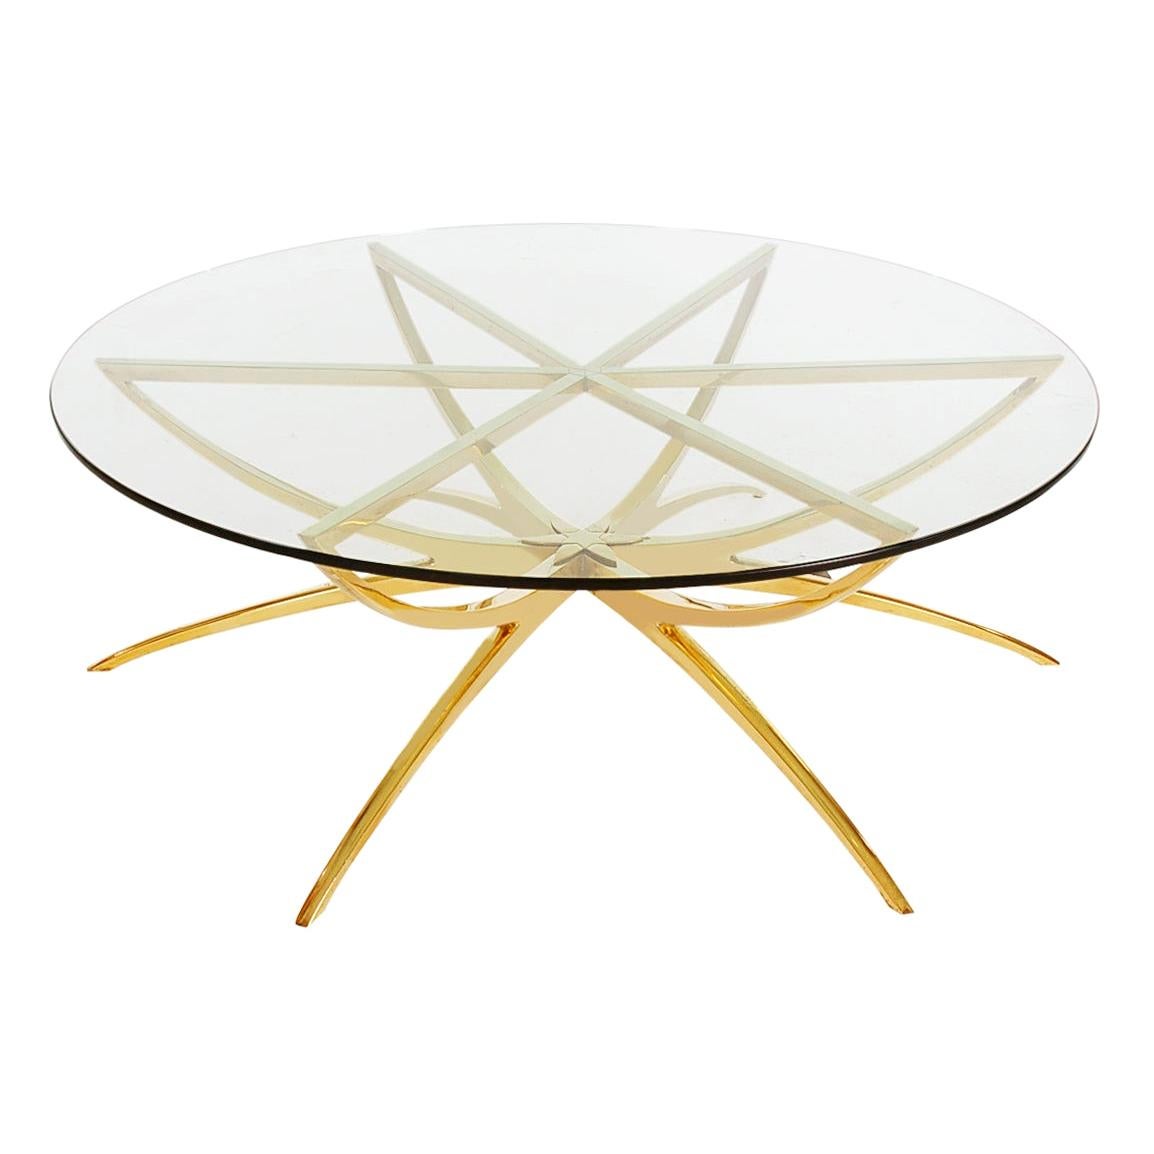 Solid Brass Midcentury Italian Modern Round Glass Top Spider Cocktail Table